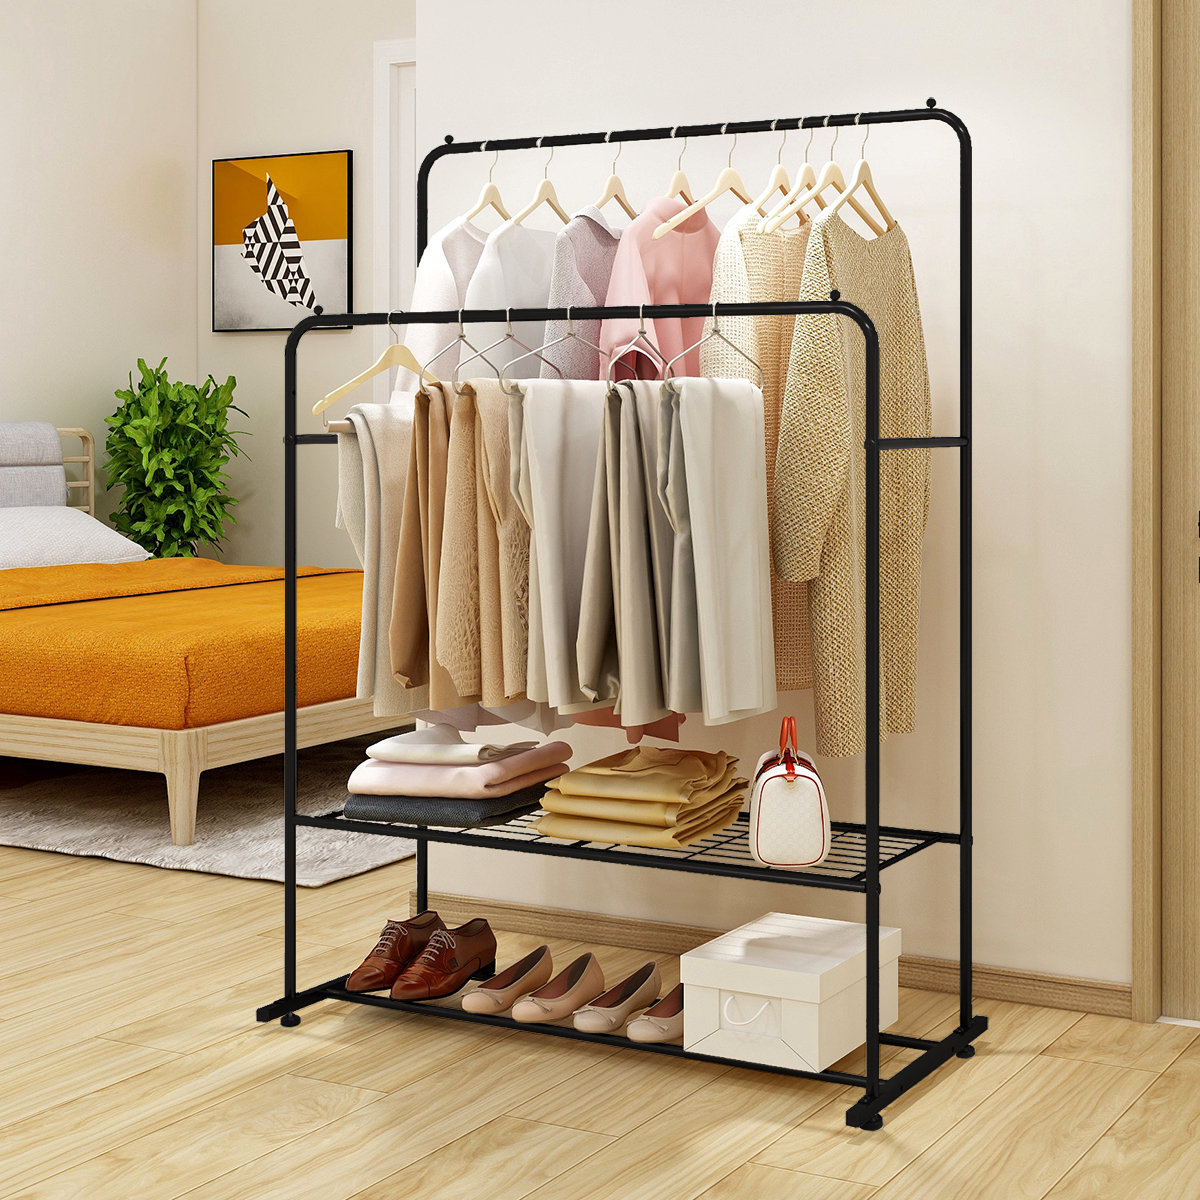 Heavy Duty Double Bar Rolling Clothes Rack Hanging Garment Durable Dry Hanger 